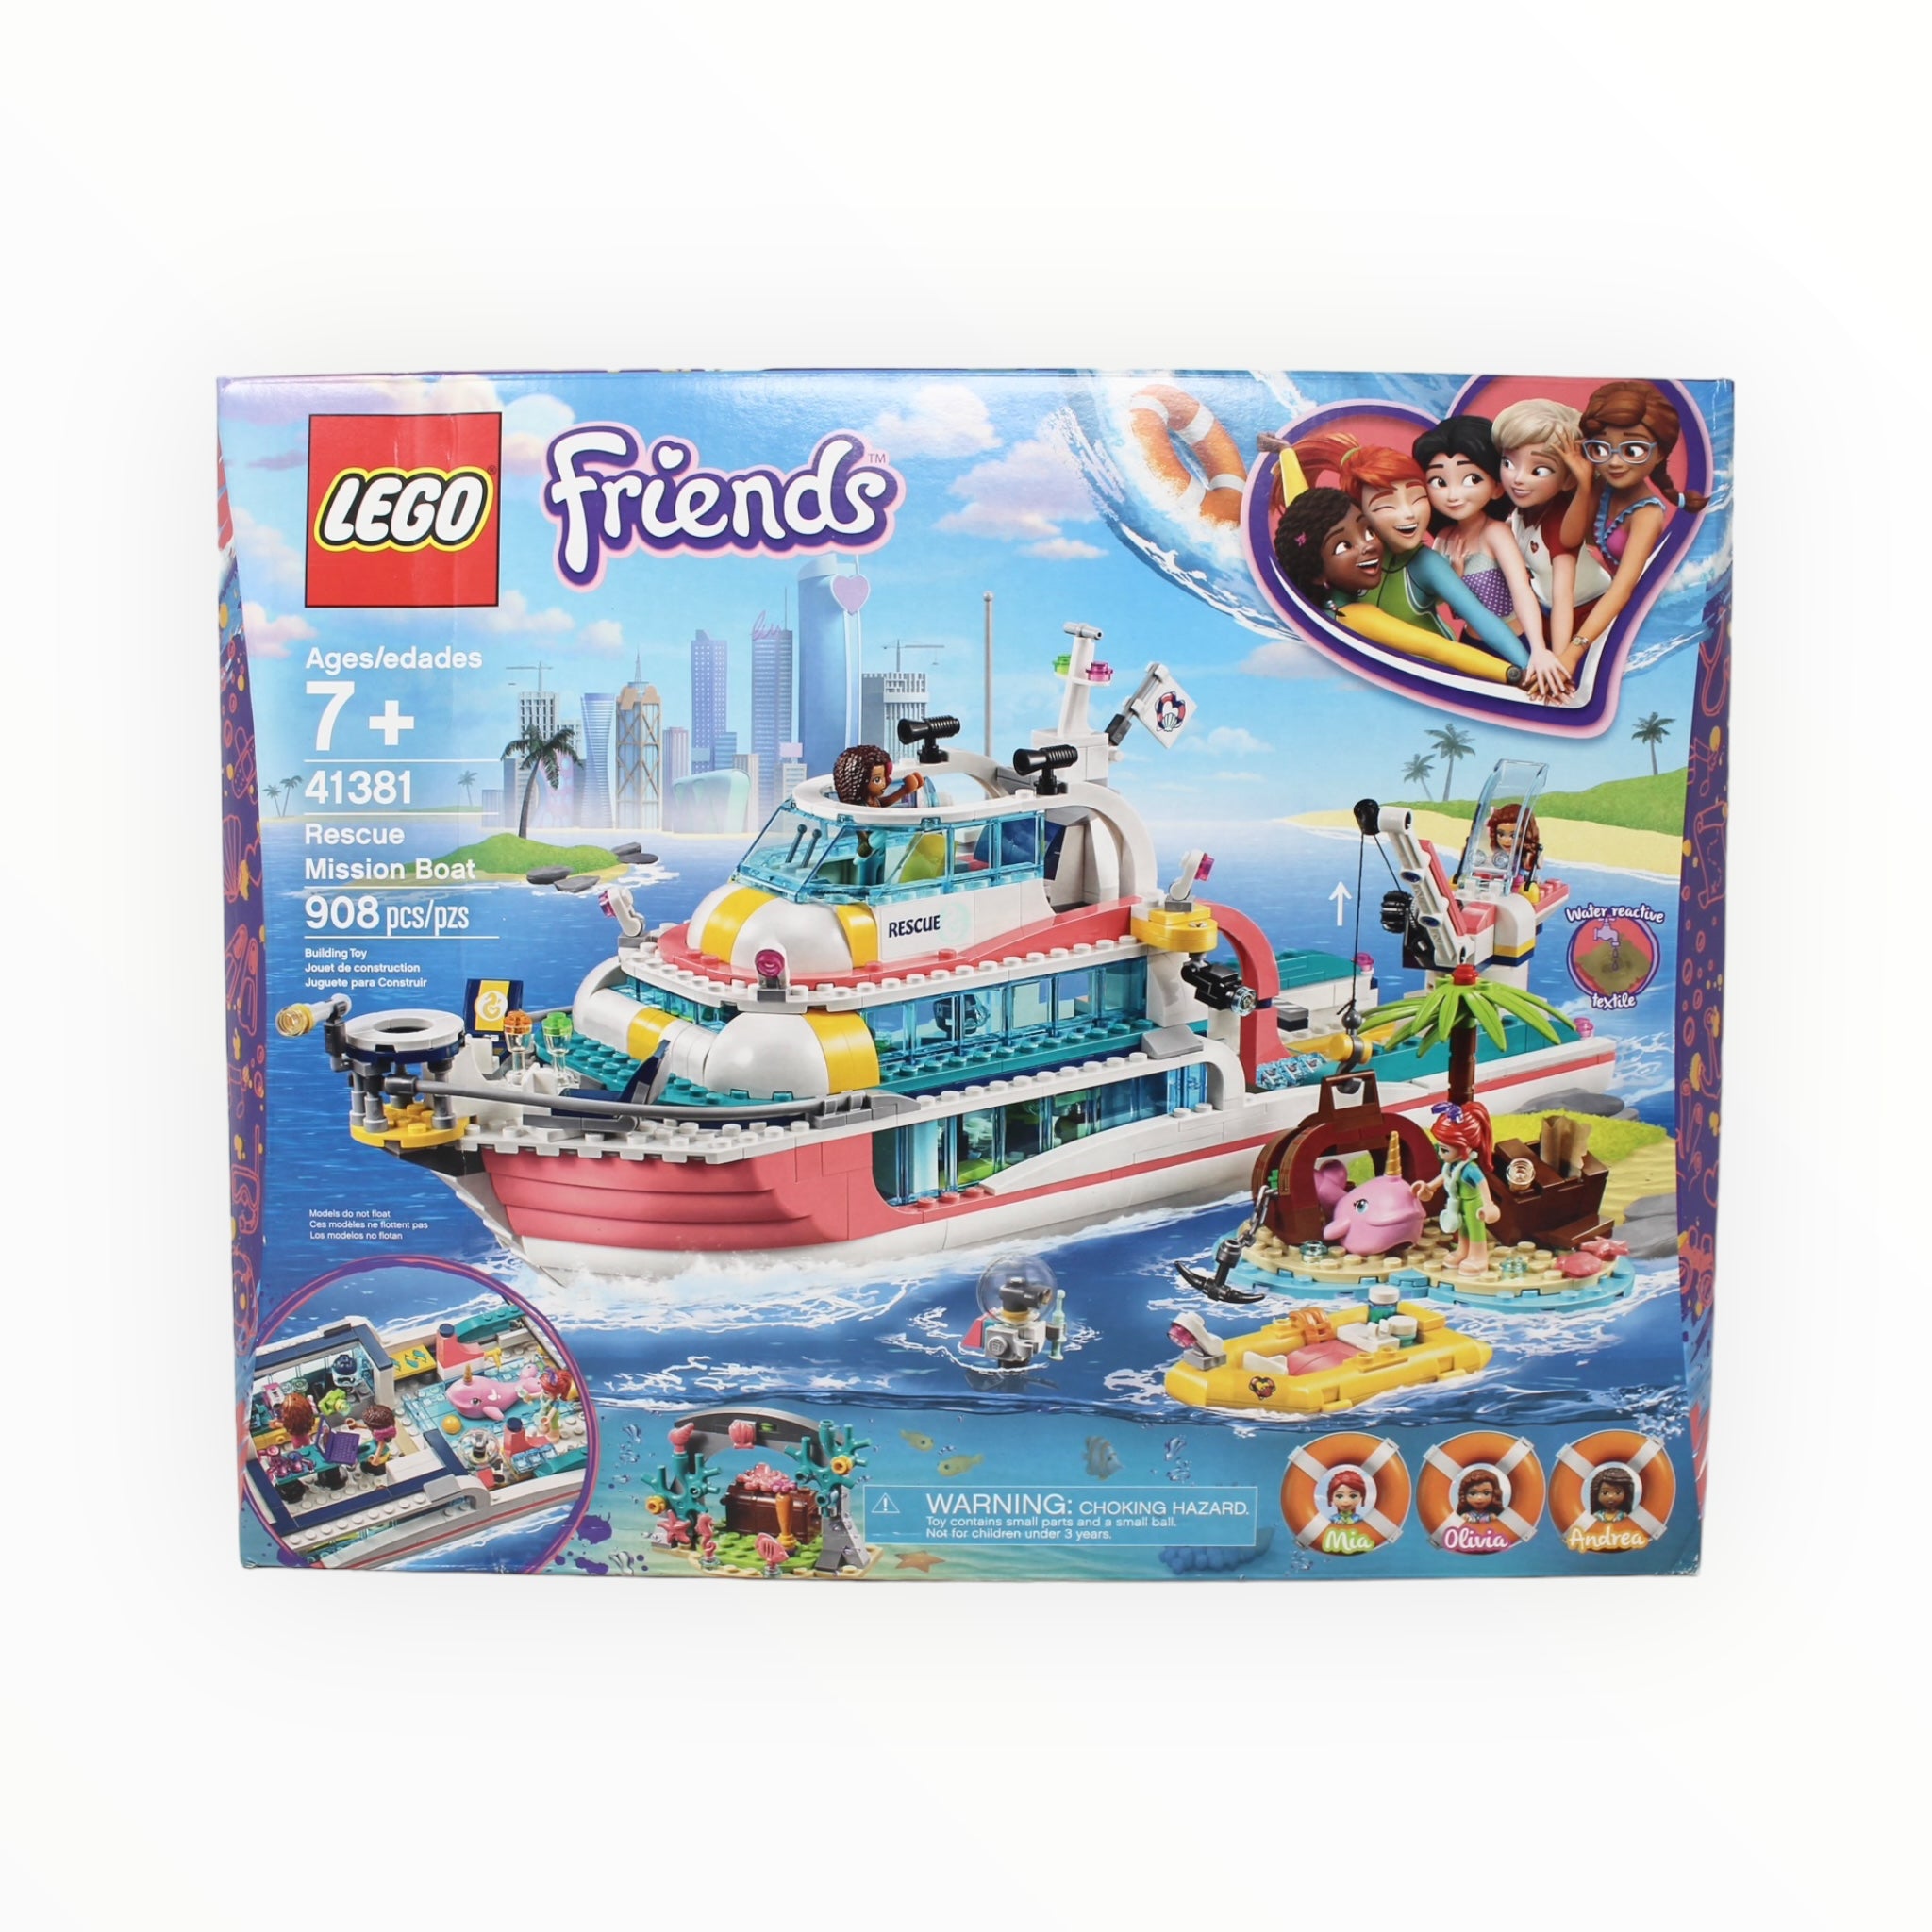 Retired Set 41381 Friends Rescue Mission Boat (damaged box)